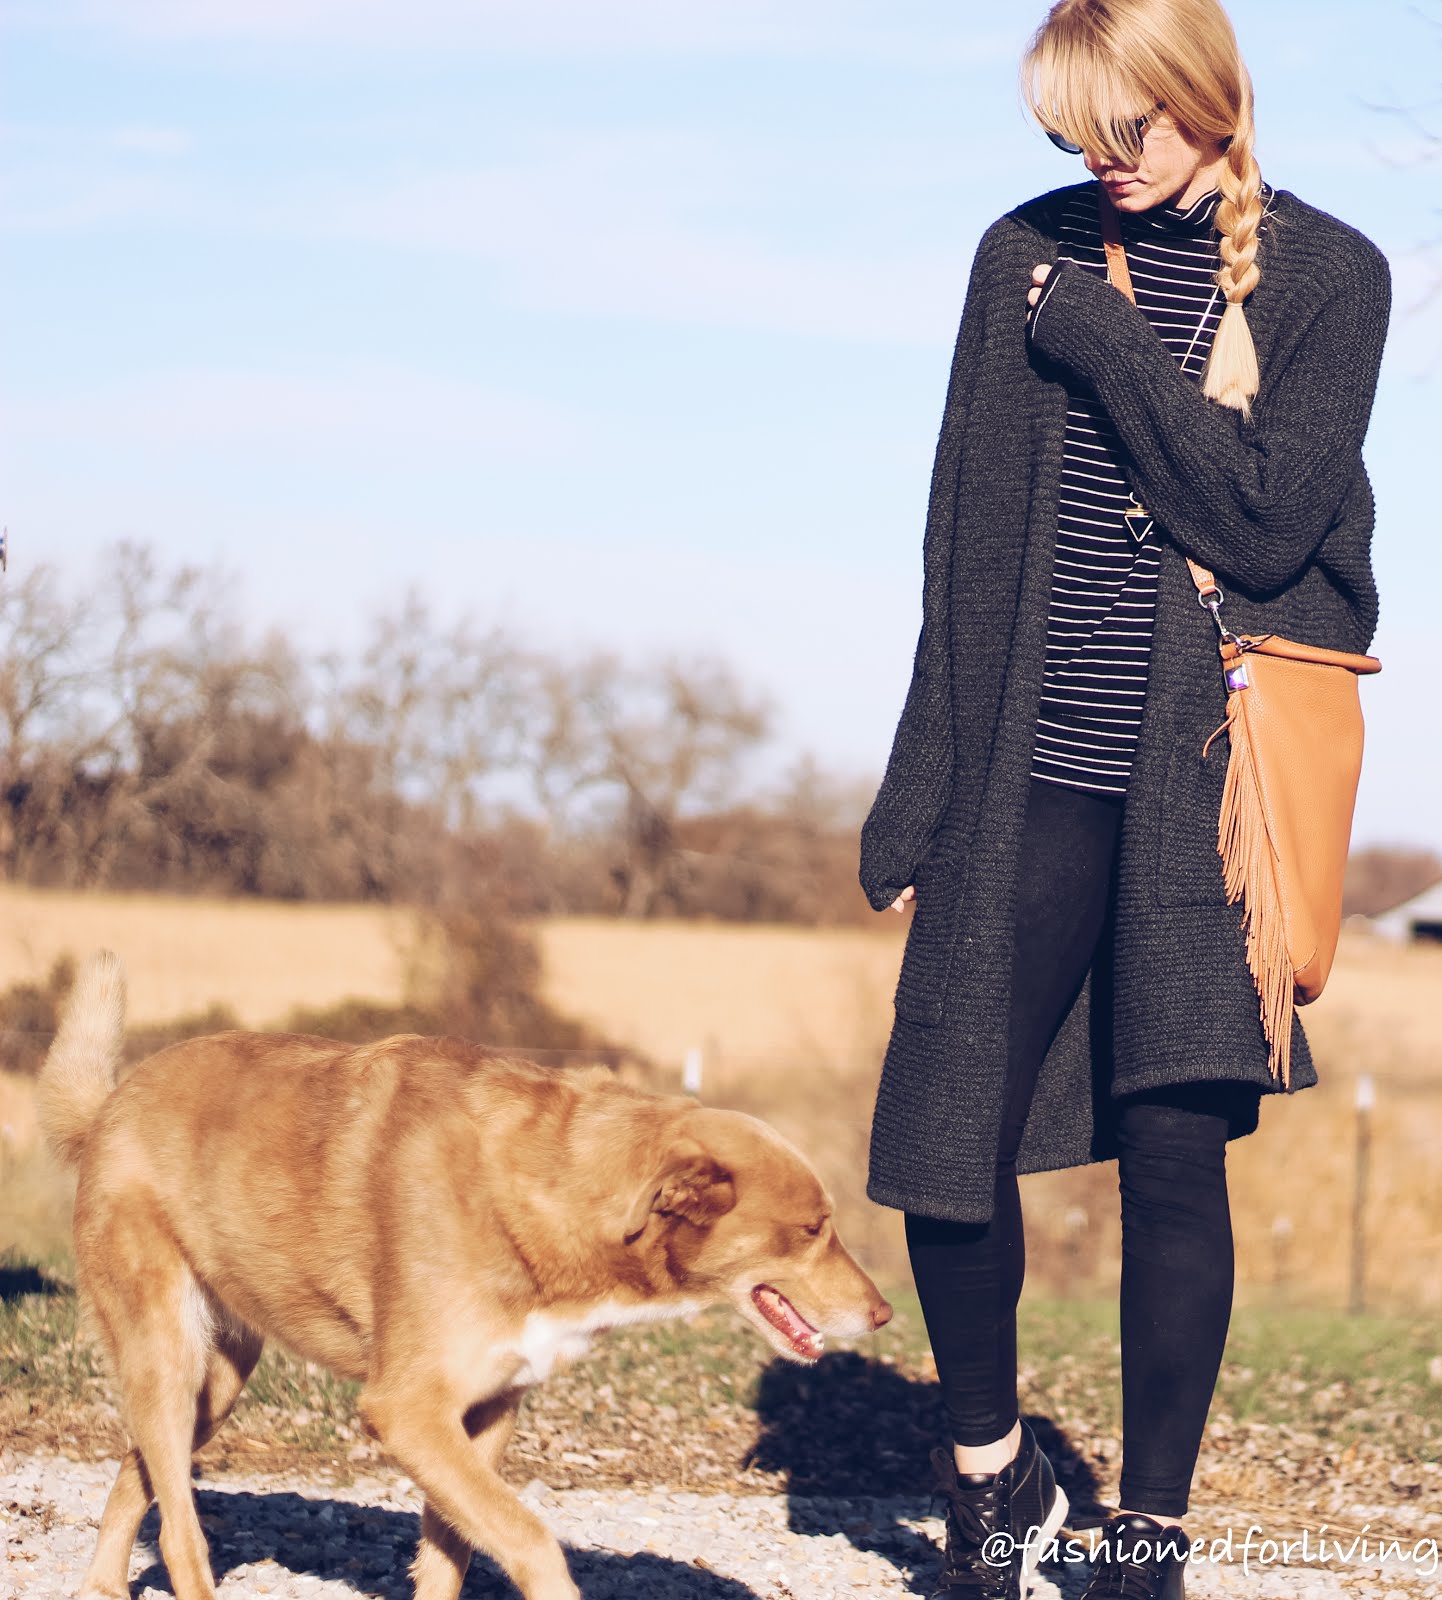 Fashioned For Living: long cardi coat outfit with suede leggings